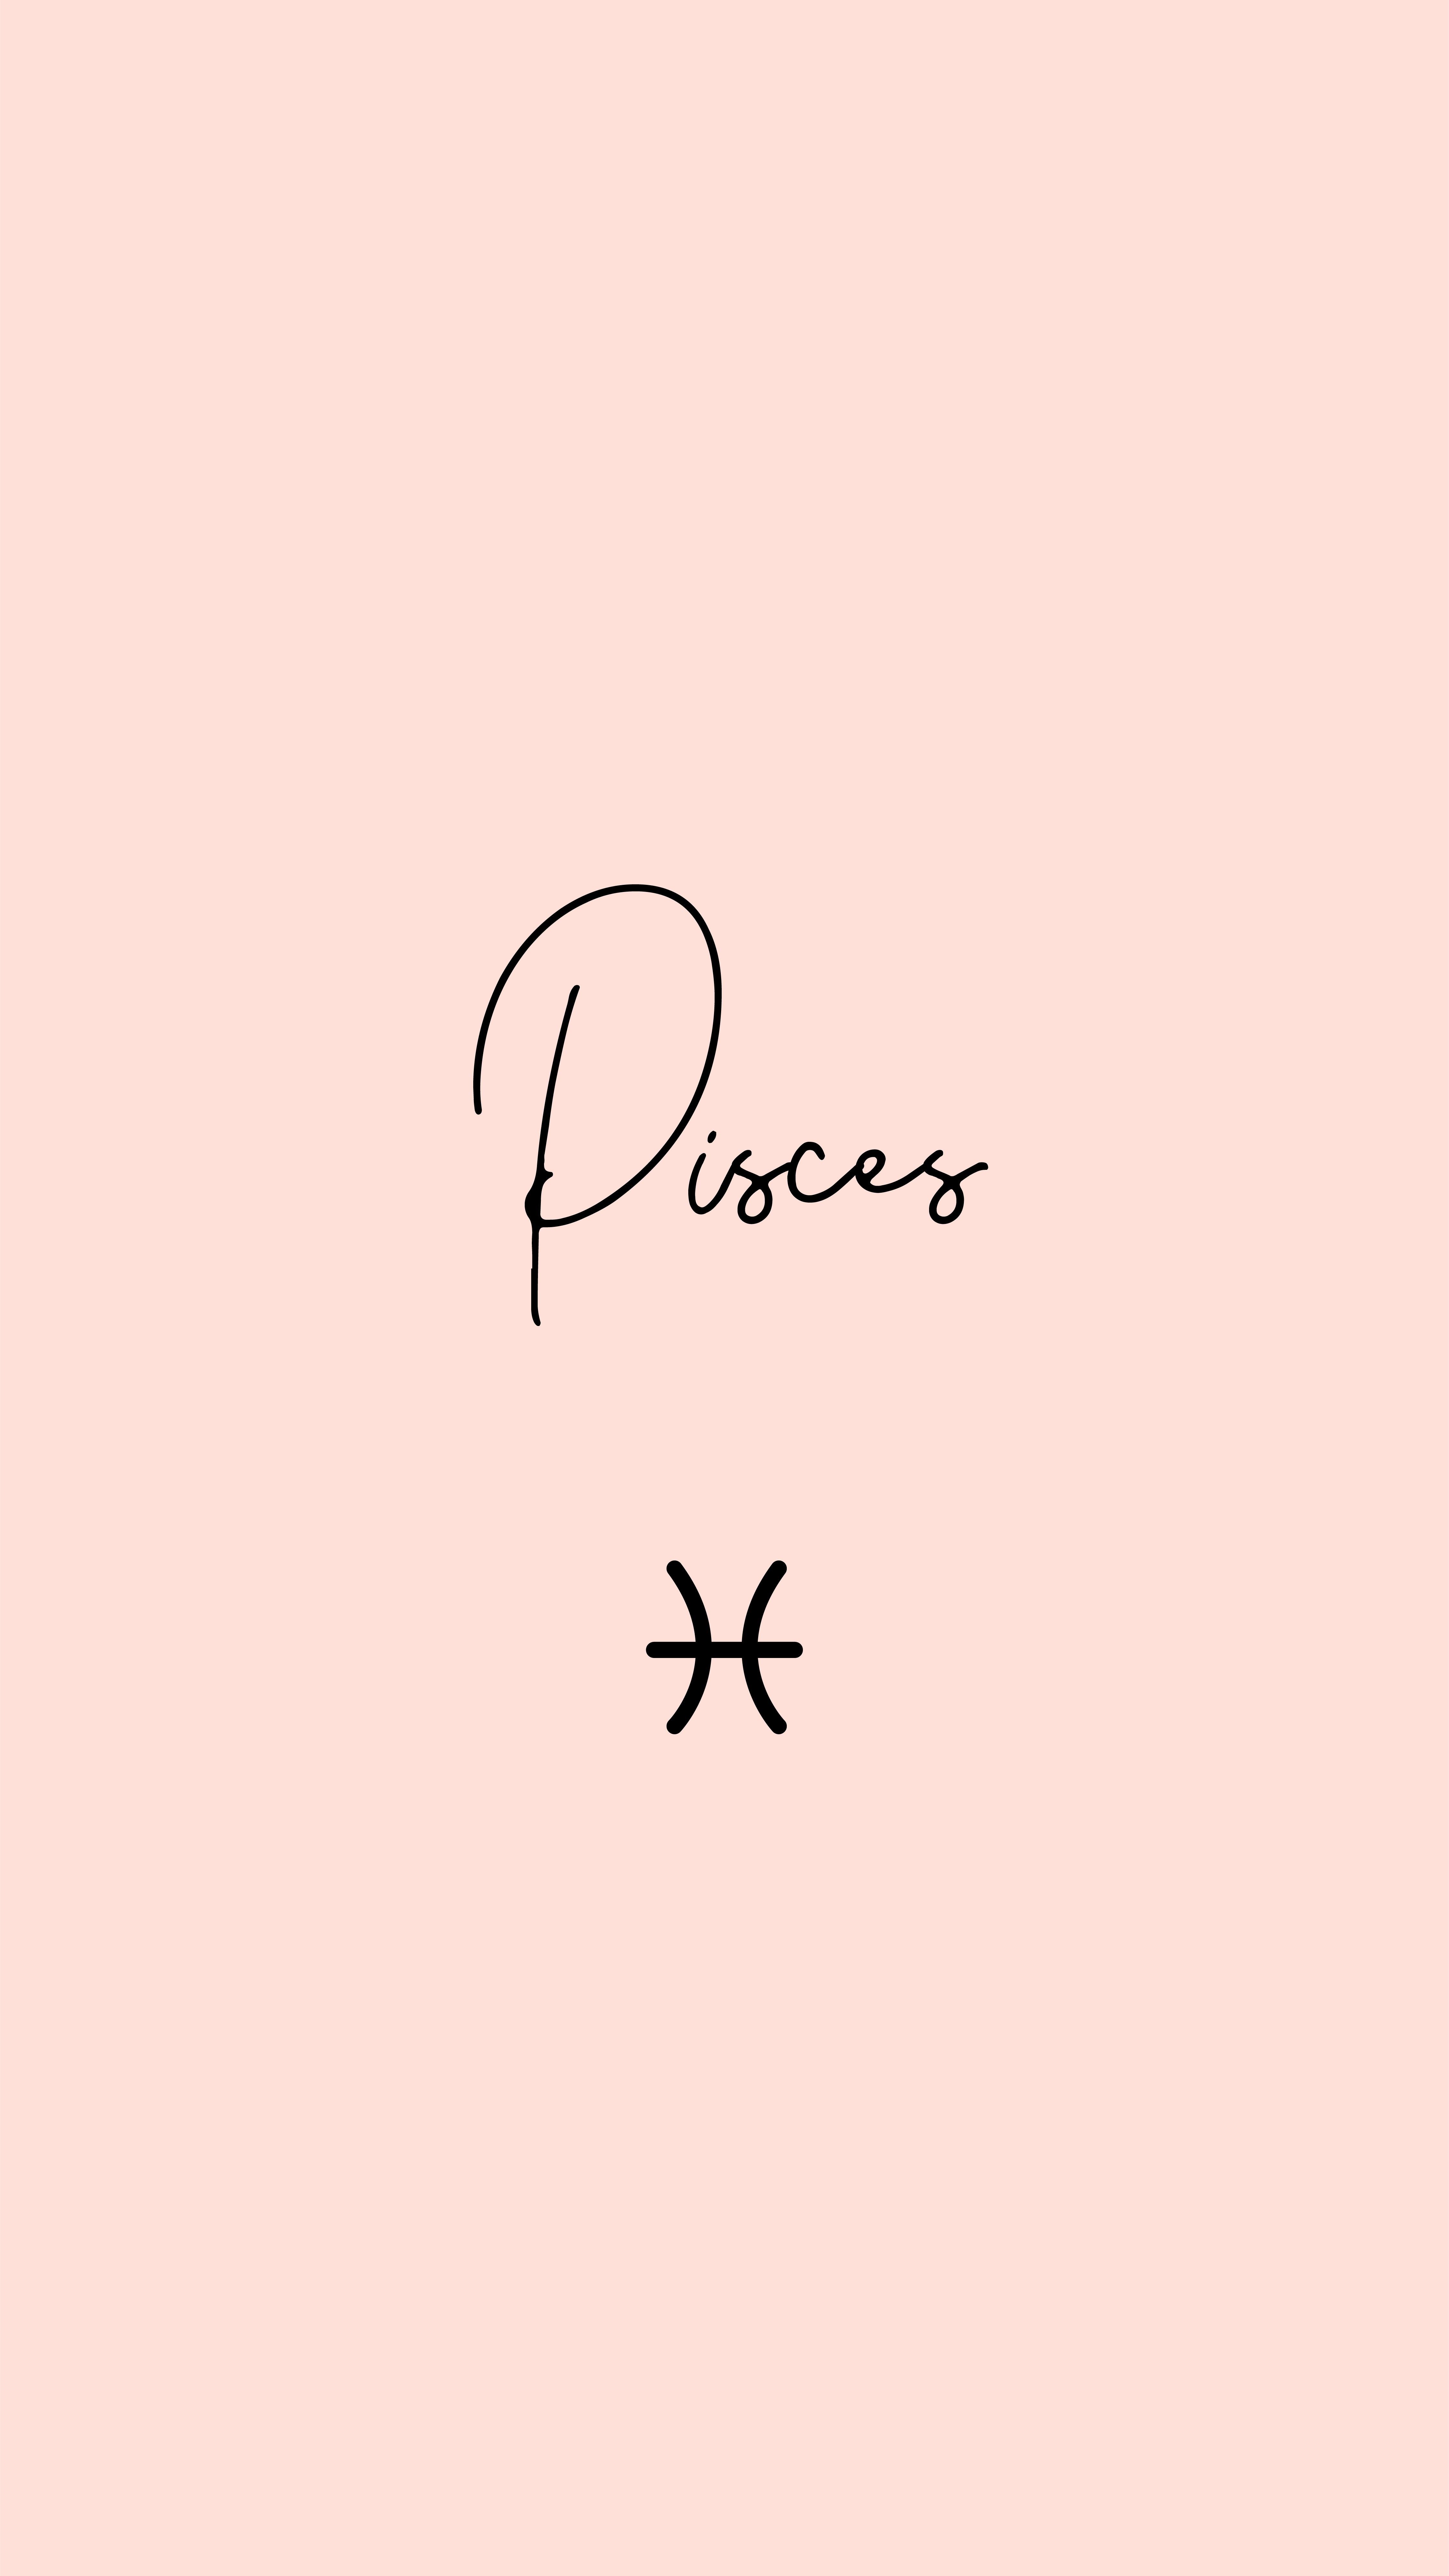 Free Phone Wallpaper Background. Astrological Sign. Zodiac Sign. Free phone wallpaper, Zodiac signs pisces, Cute patterns wallpaper